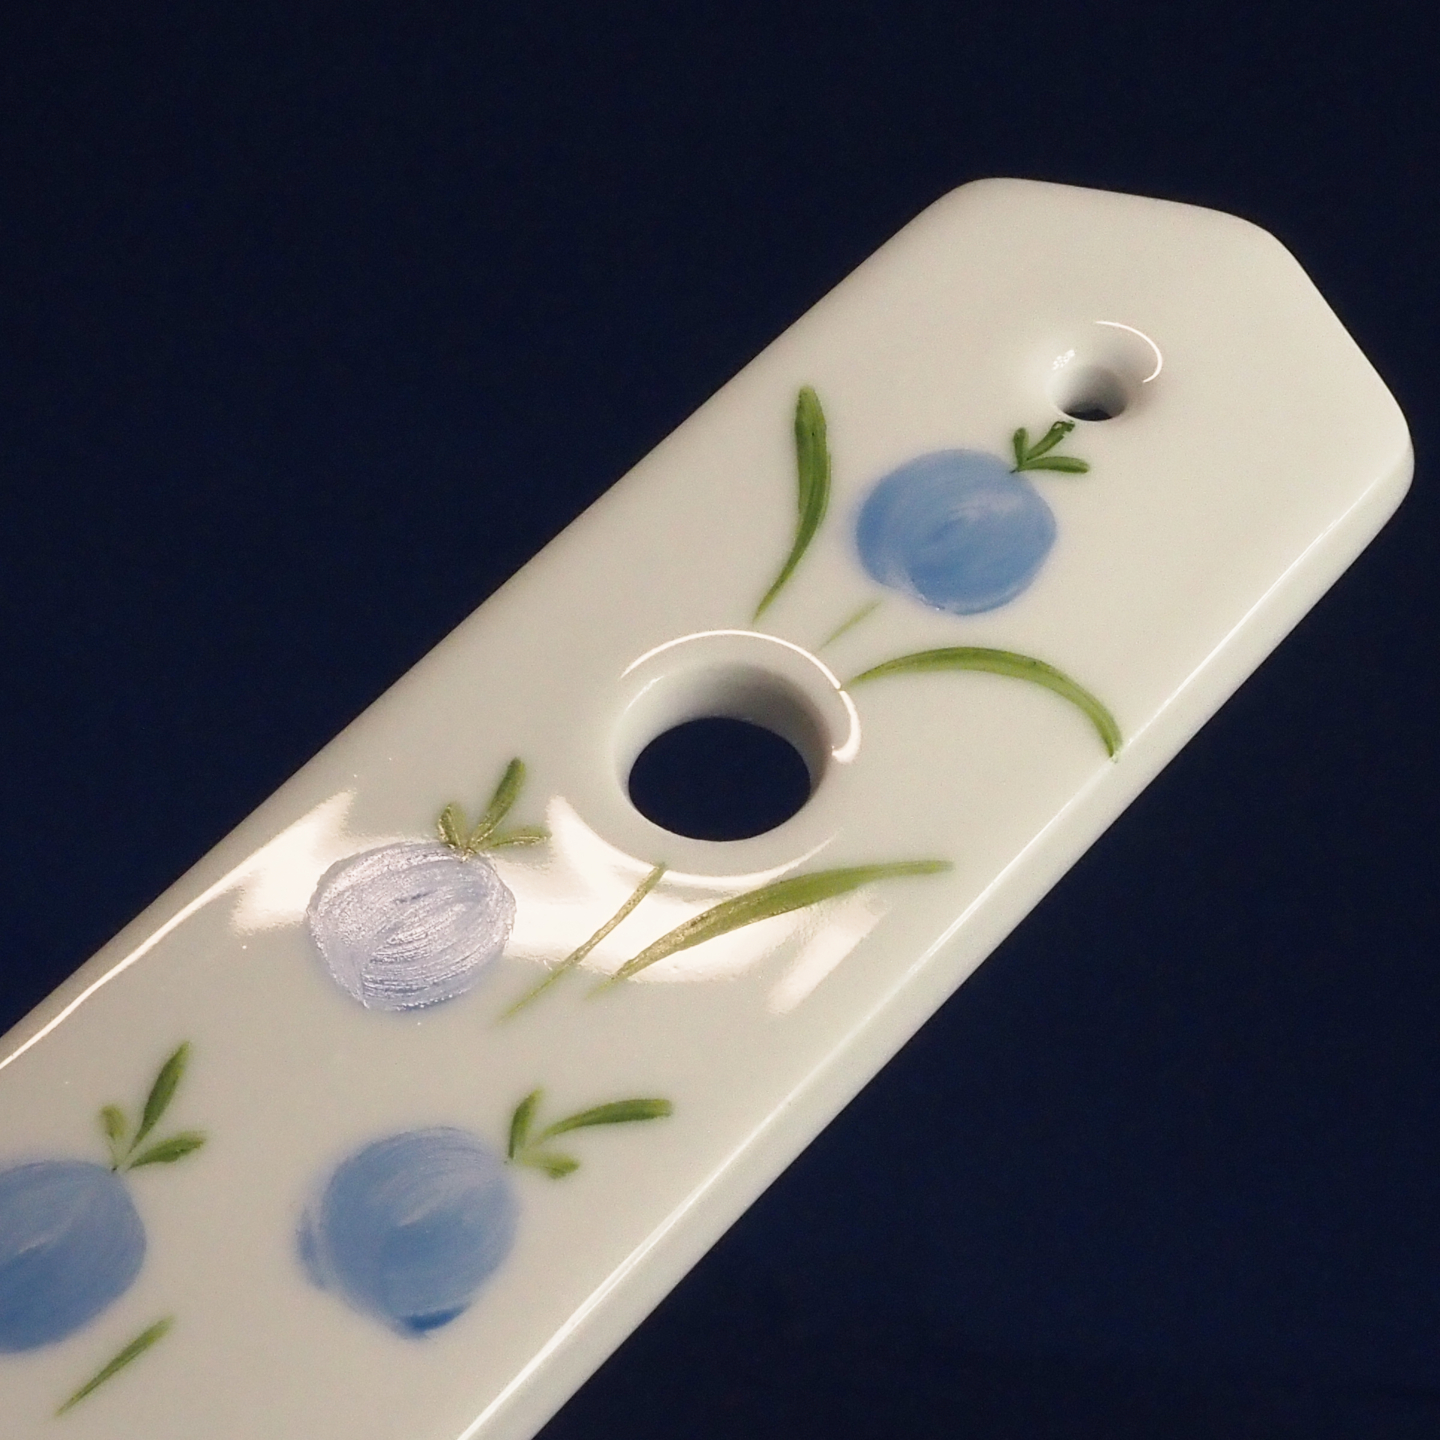 Doorplate in Limoges porcelain with hand drawn blueberries ornaments